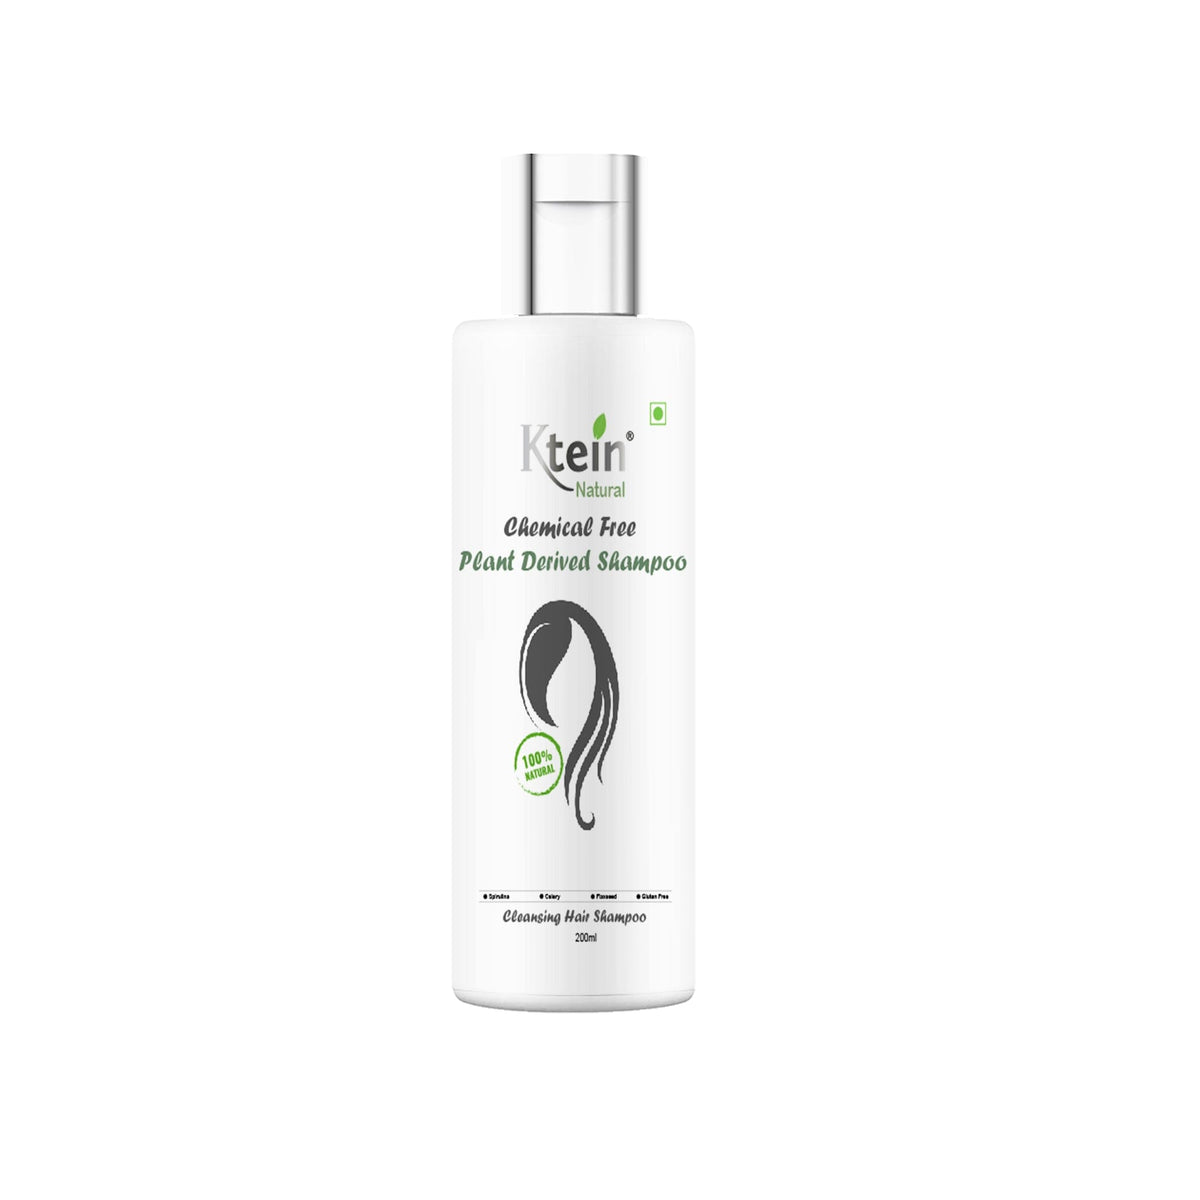 Chemical Free Plant Derived Shampoo - 200ml - Ktein Cosmetics By Ktein Biotech Private Limited